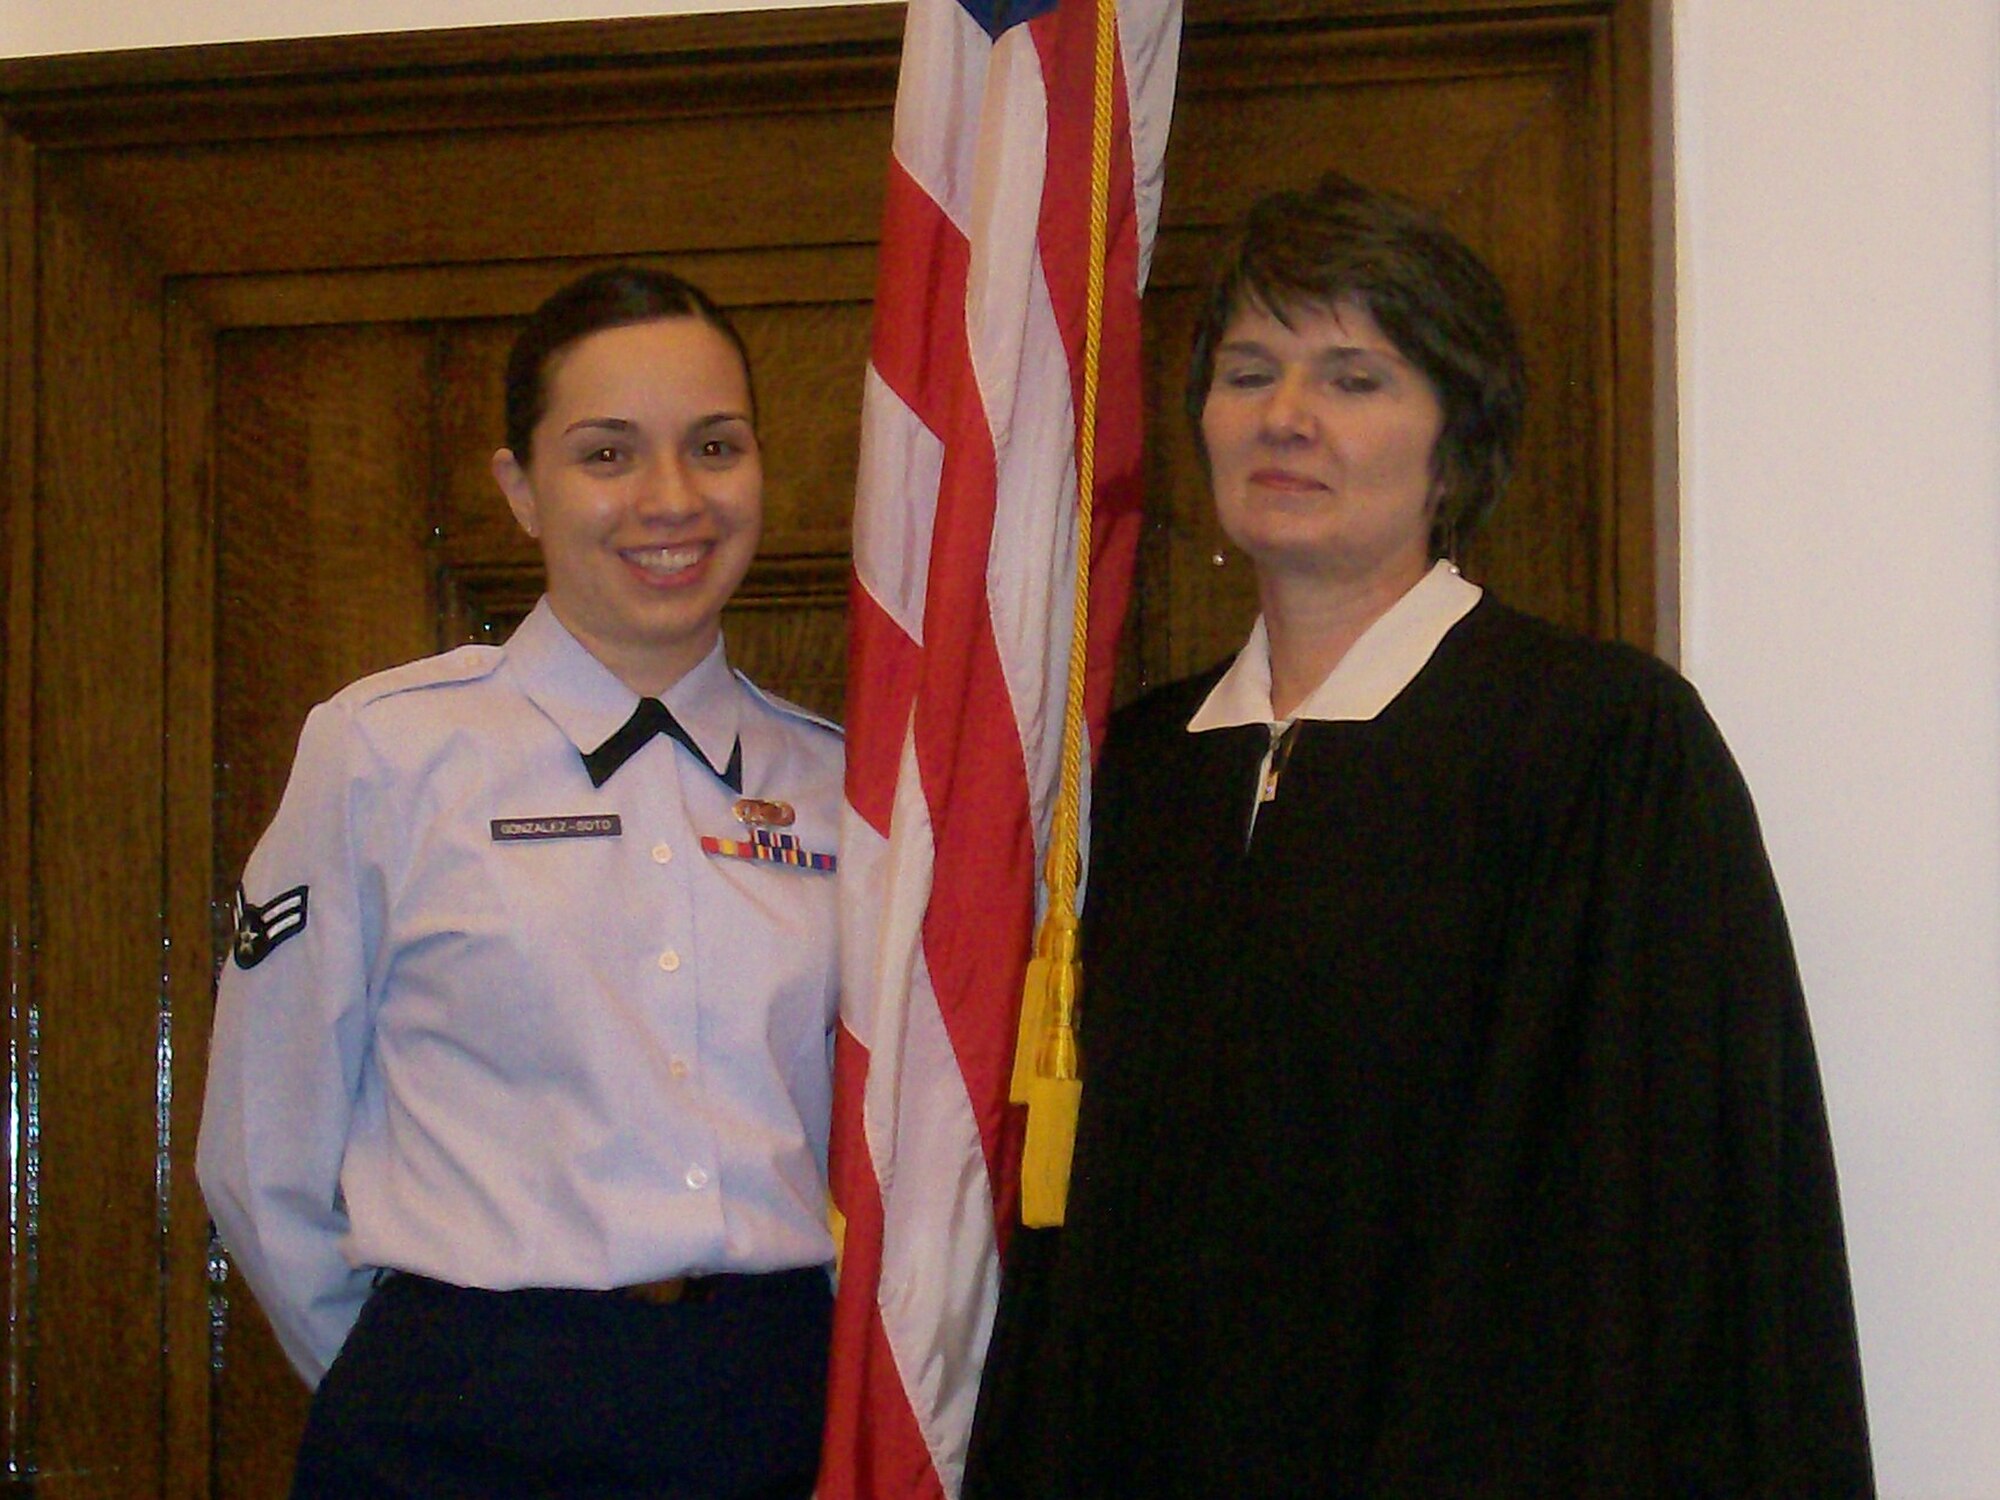 MINOT AIR FORCE BASE, N.D. -- Airman 1st Class Maria Gonzales-Soto, an information manager with the 5th Mission Support Group, stands with the judge who conducted her swearing-in ceremony in Grand Forks, N.D., April 25. The ceremony officially recognized Airman Gonzales-Soto as an American citizen. (Courtesy photo)